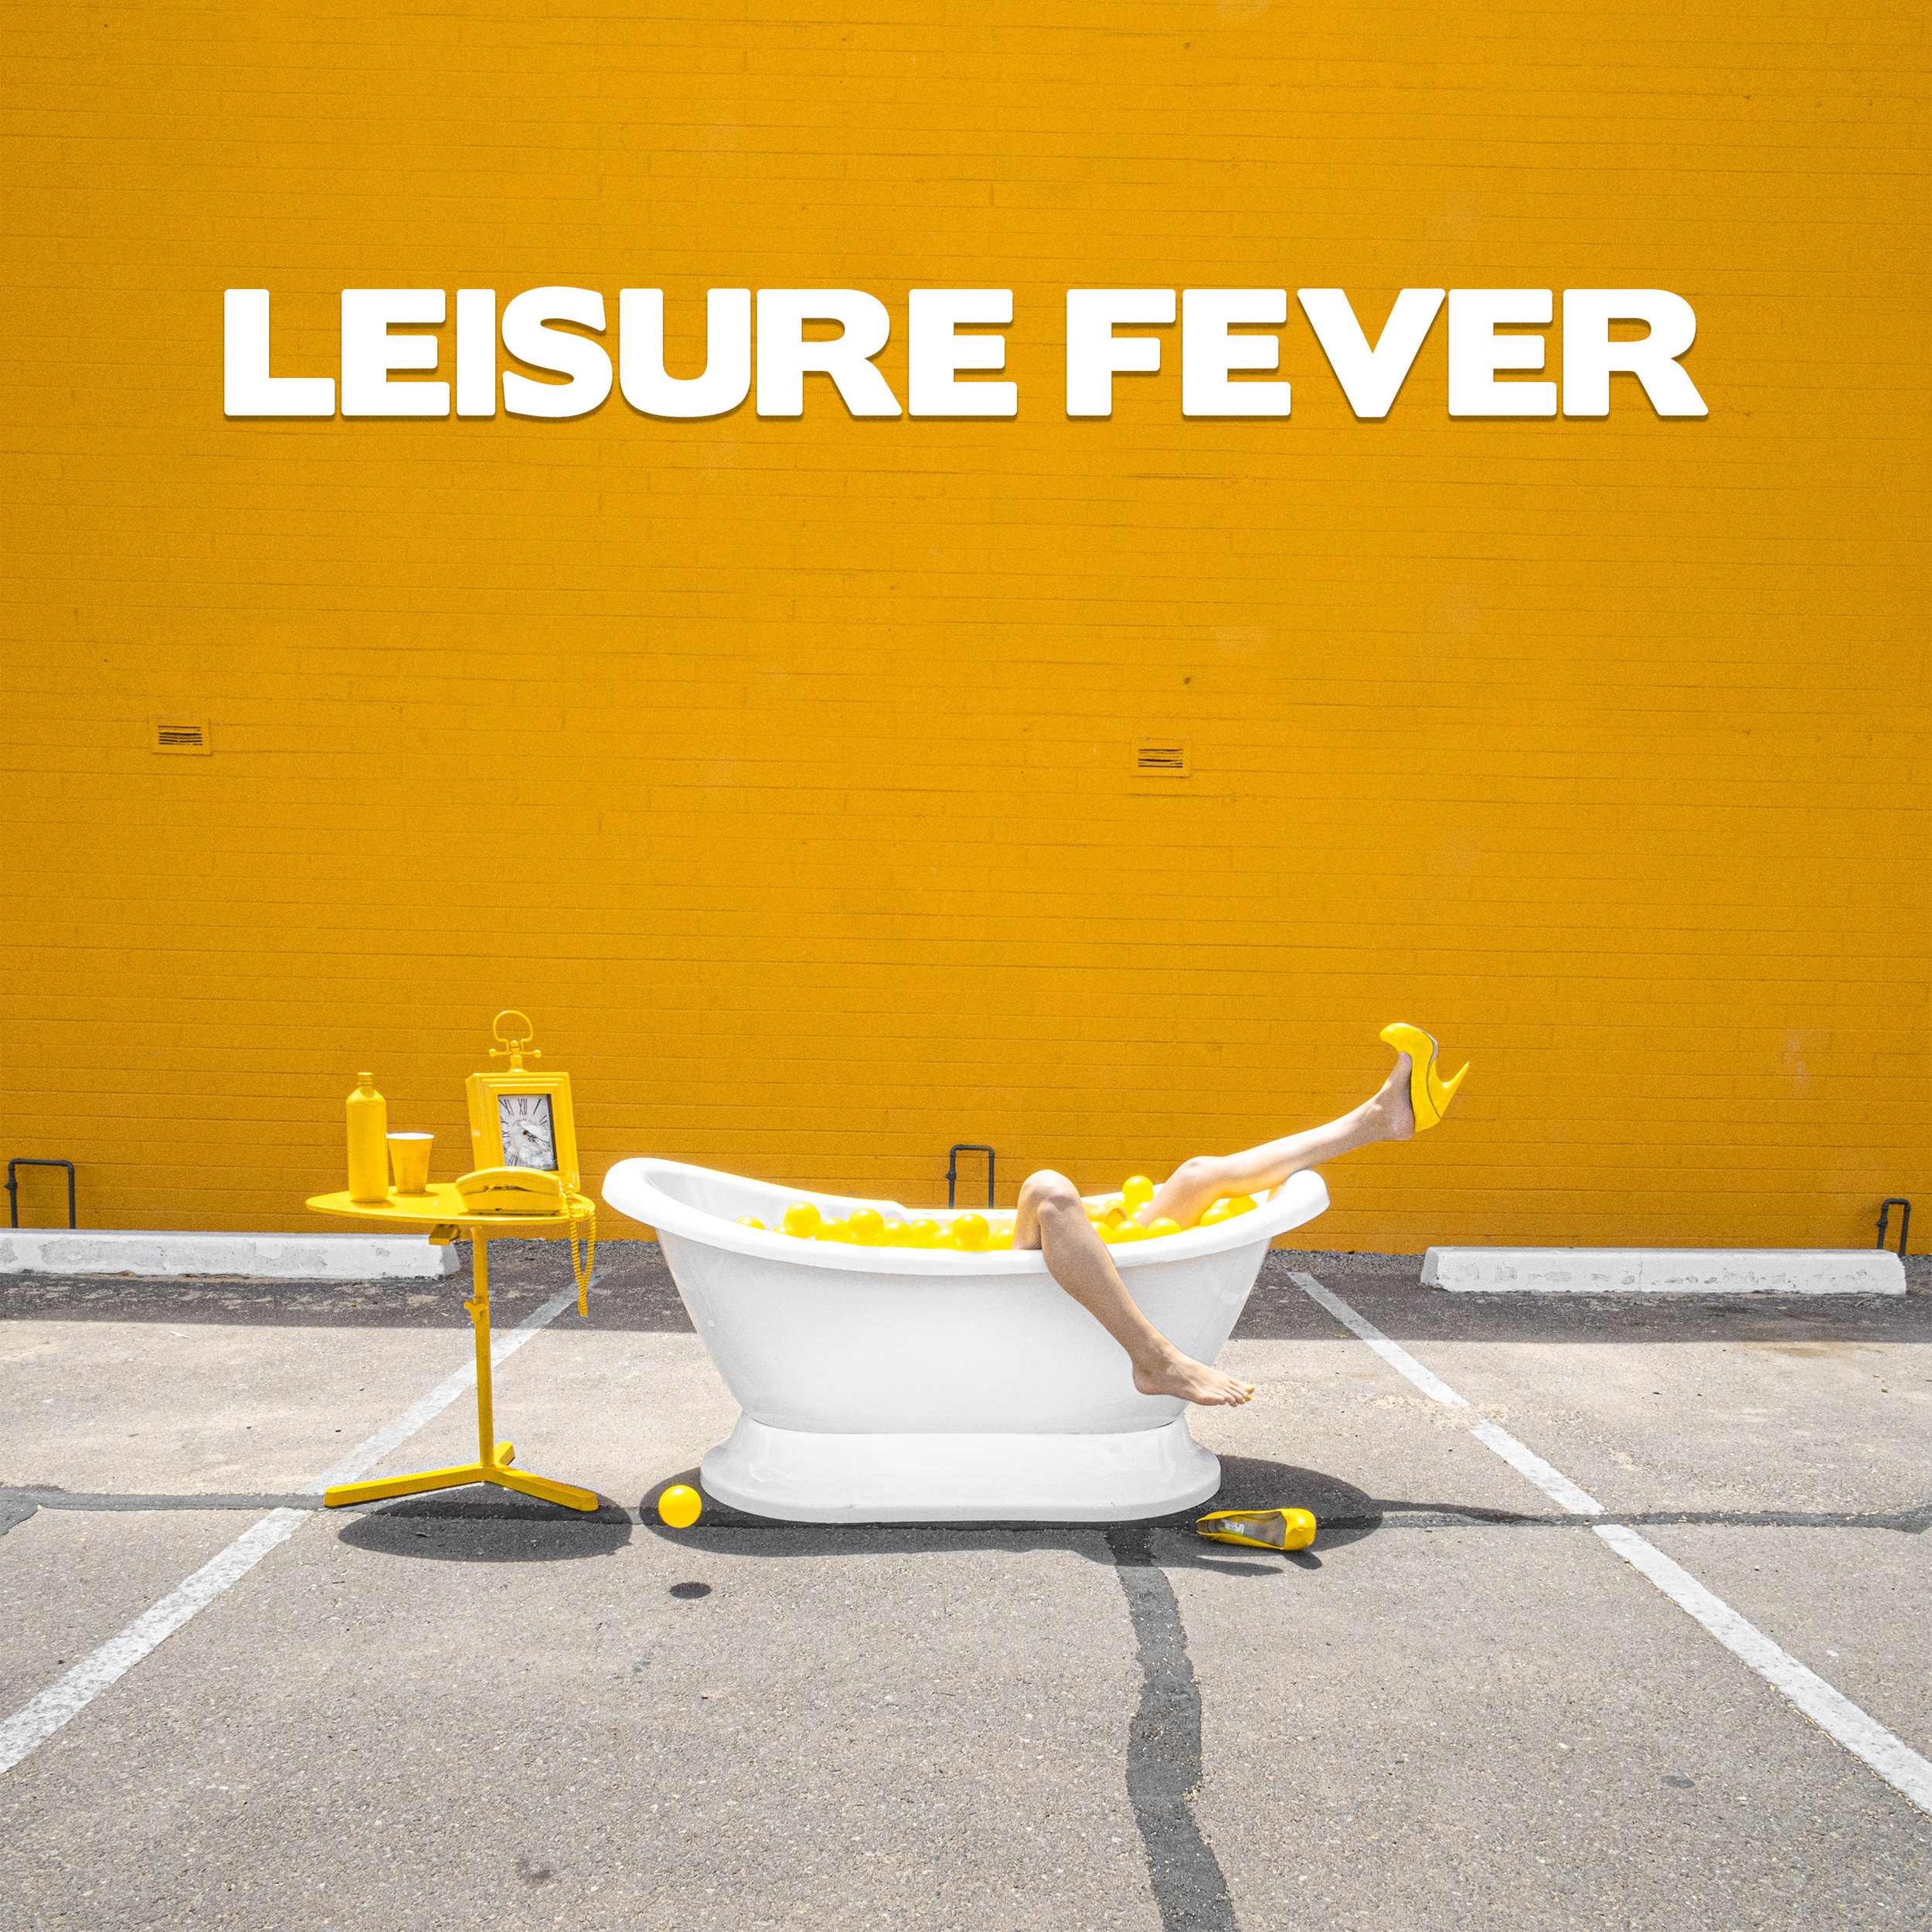 LEISURE FEVER BAREFOOT COVER ART 2019 FINAL LORES.jpg